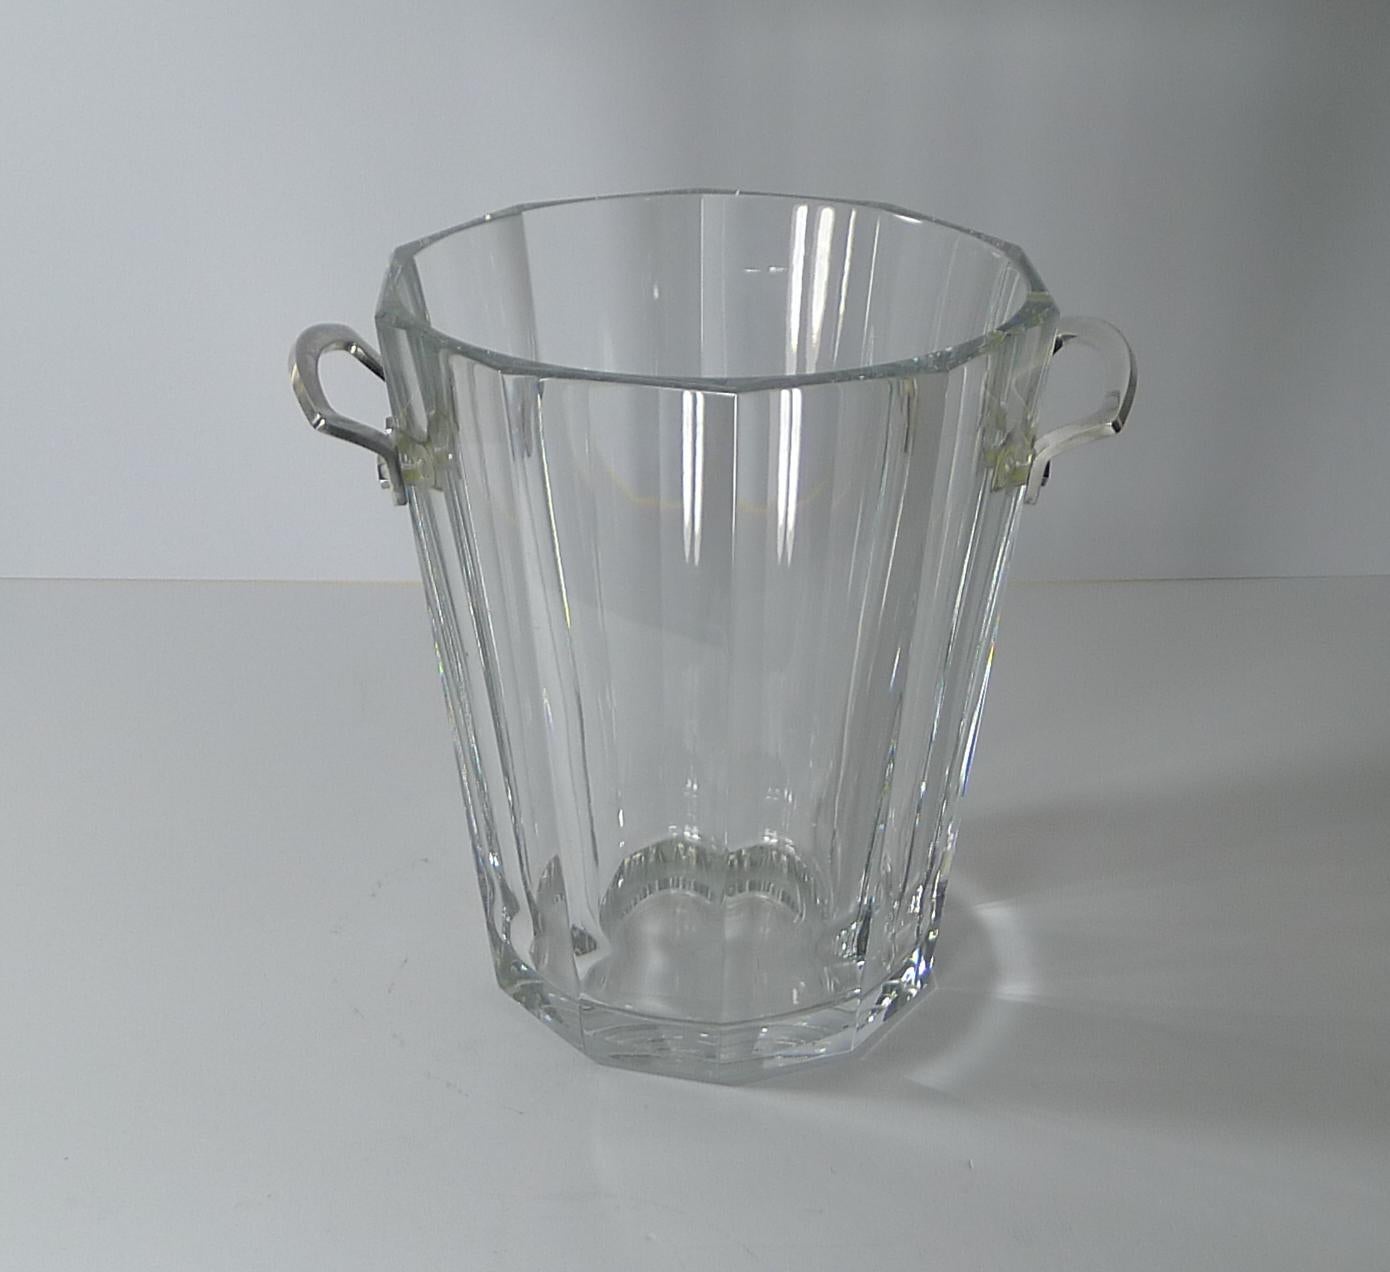 A fabulous hefty piece of French crystal was used to create this smart Baccarat Champagne / Ice bucket in the 